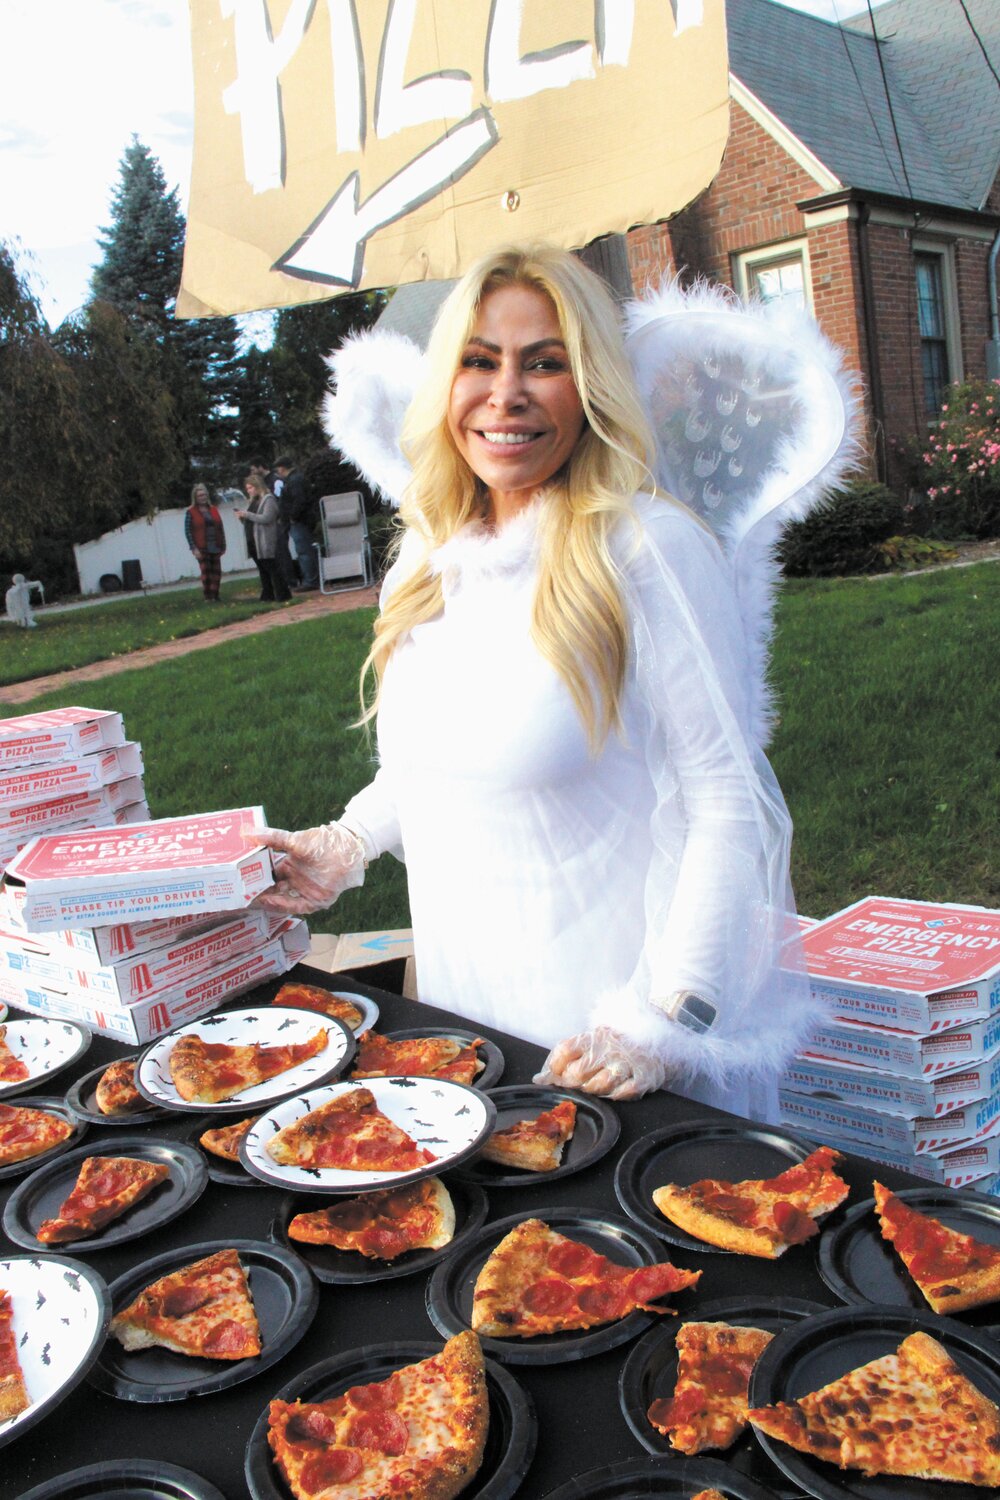 BEST JOB: School Committee member Leah Hazlewood was an angel when it came to handing out pizza. She said she loved doing it because she got to meet everyone.